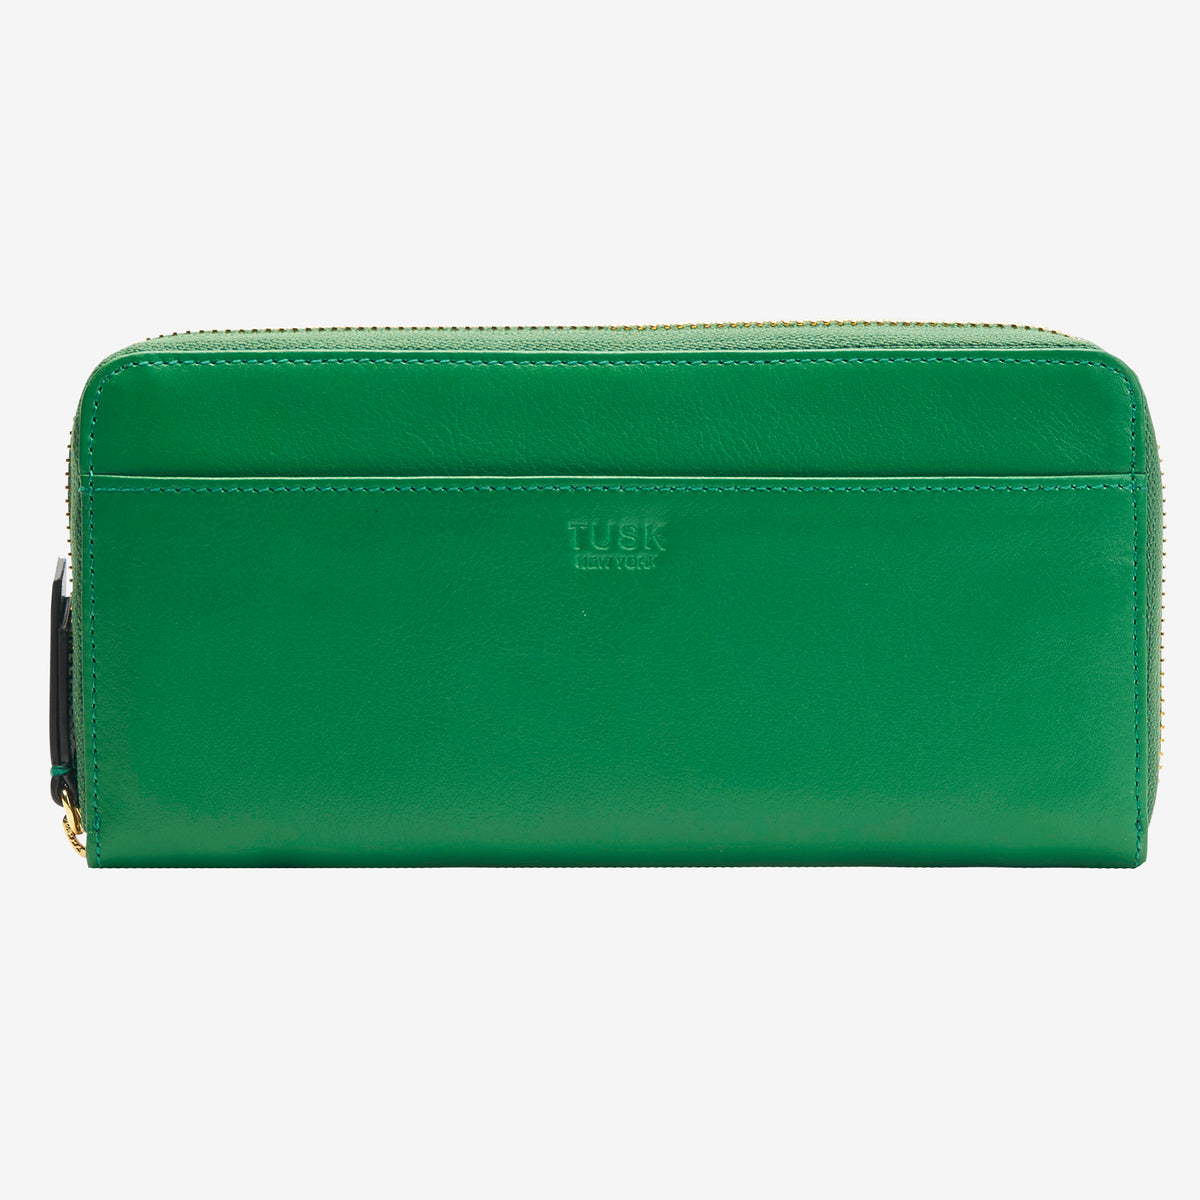 tusk-301-womens-leather-single-zip-wallet-emerald-front